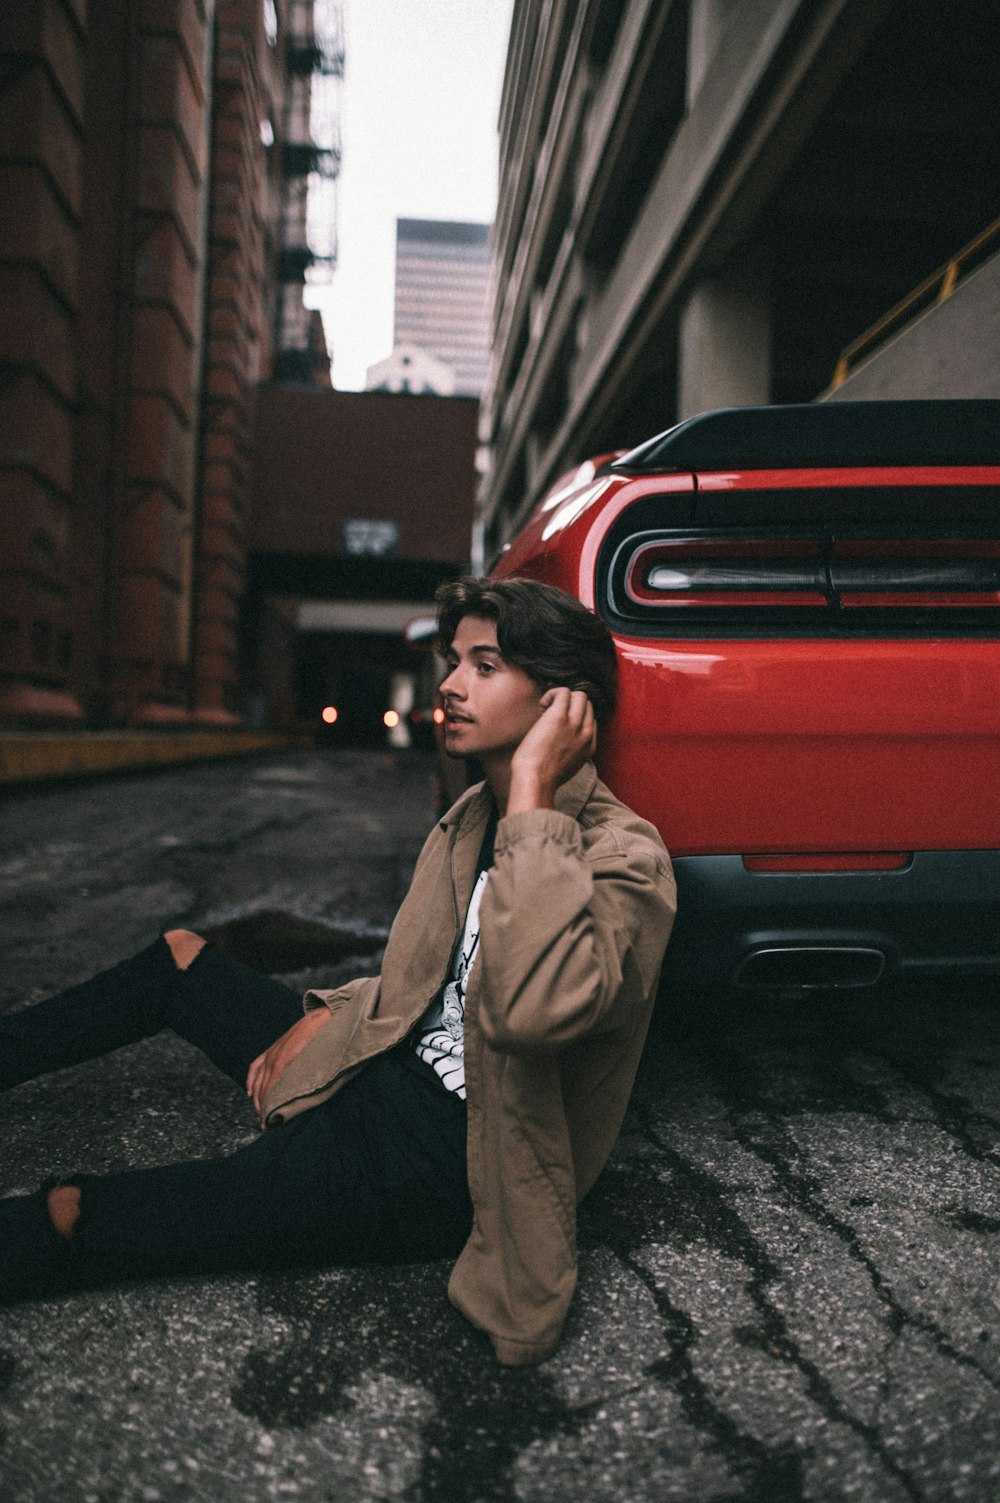 a man sitting on the ground next to a red car